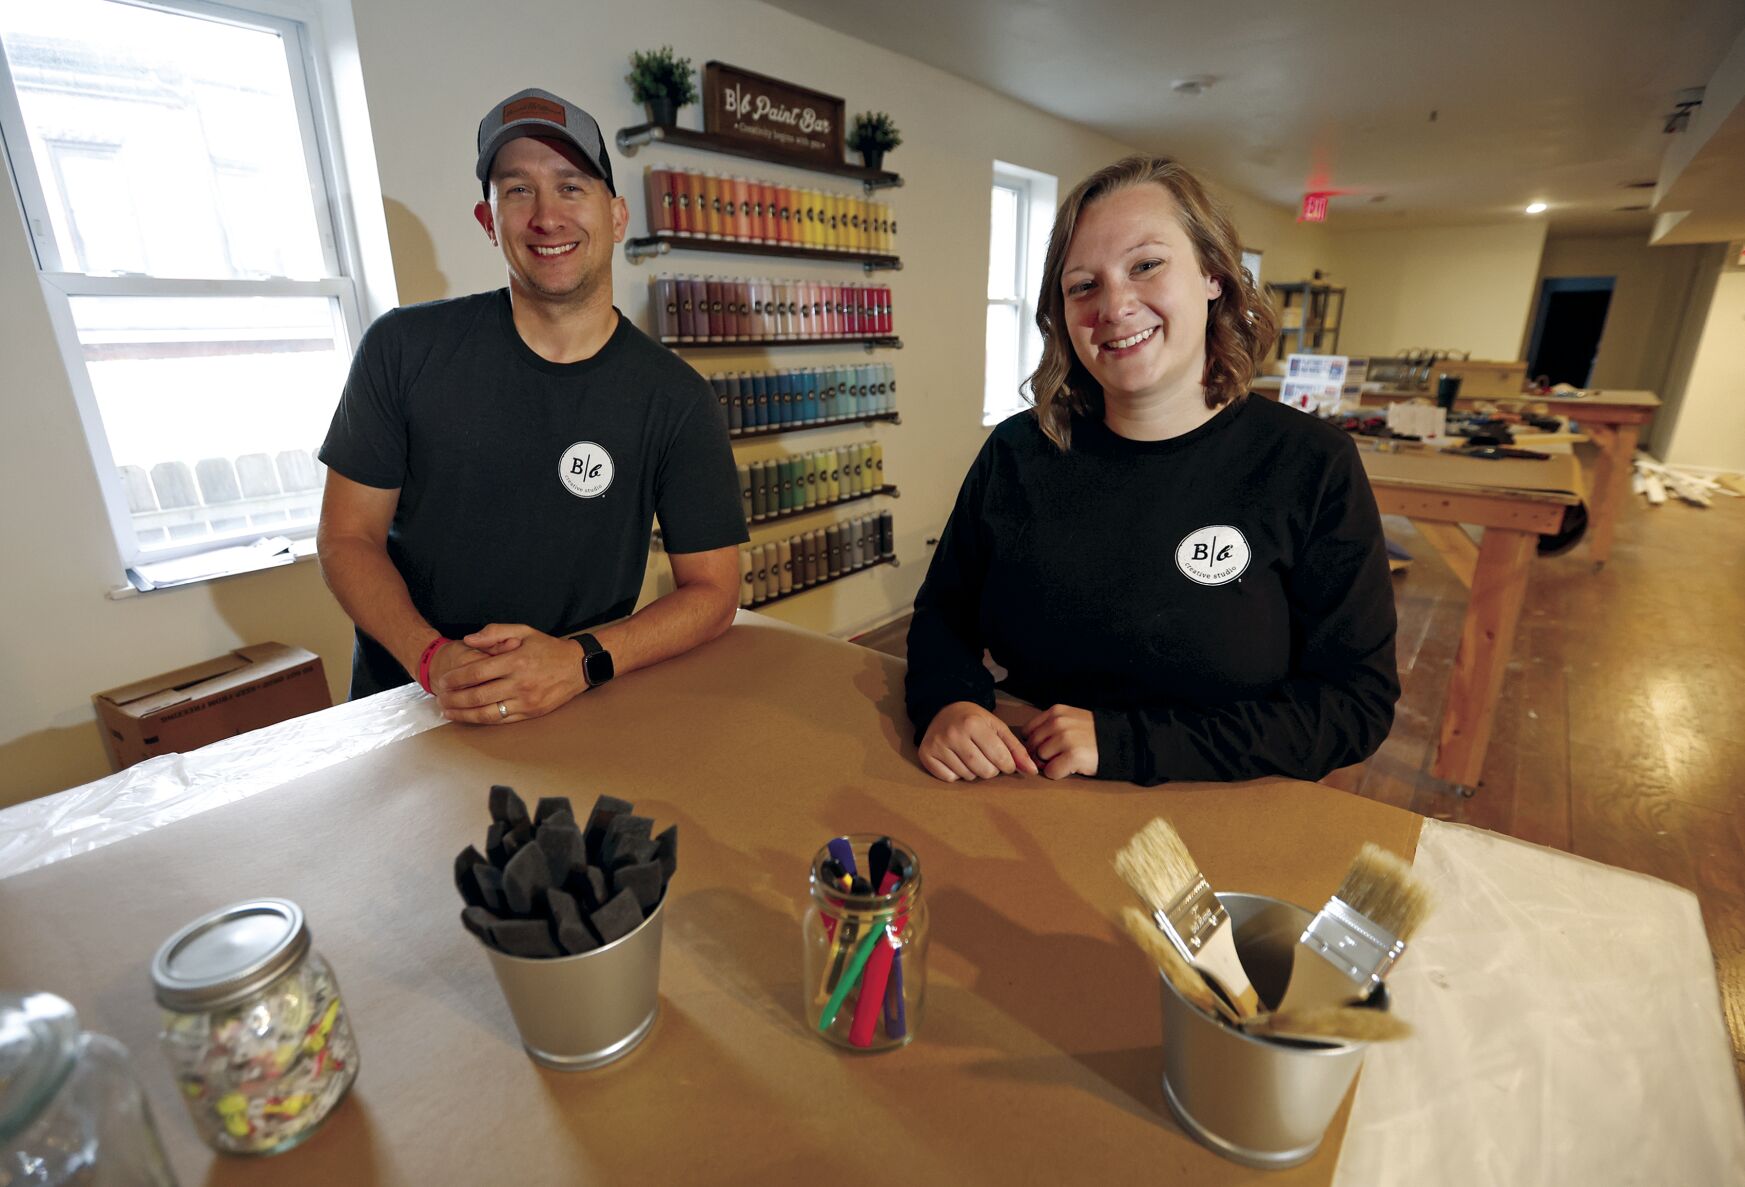 Co-owners Curran and Jen Lane will open Board & Brush Creative Studio in Galena, Ill.    PHOTO CREDIT: JESSICA REILLY